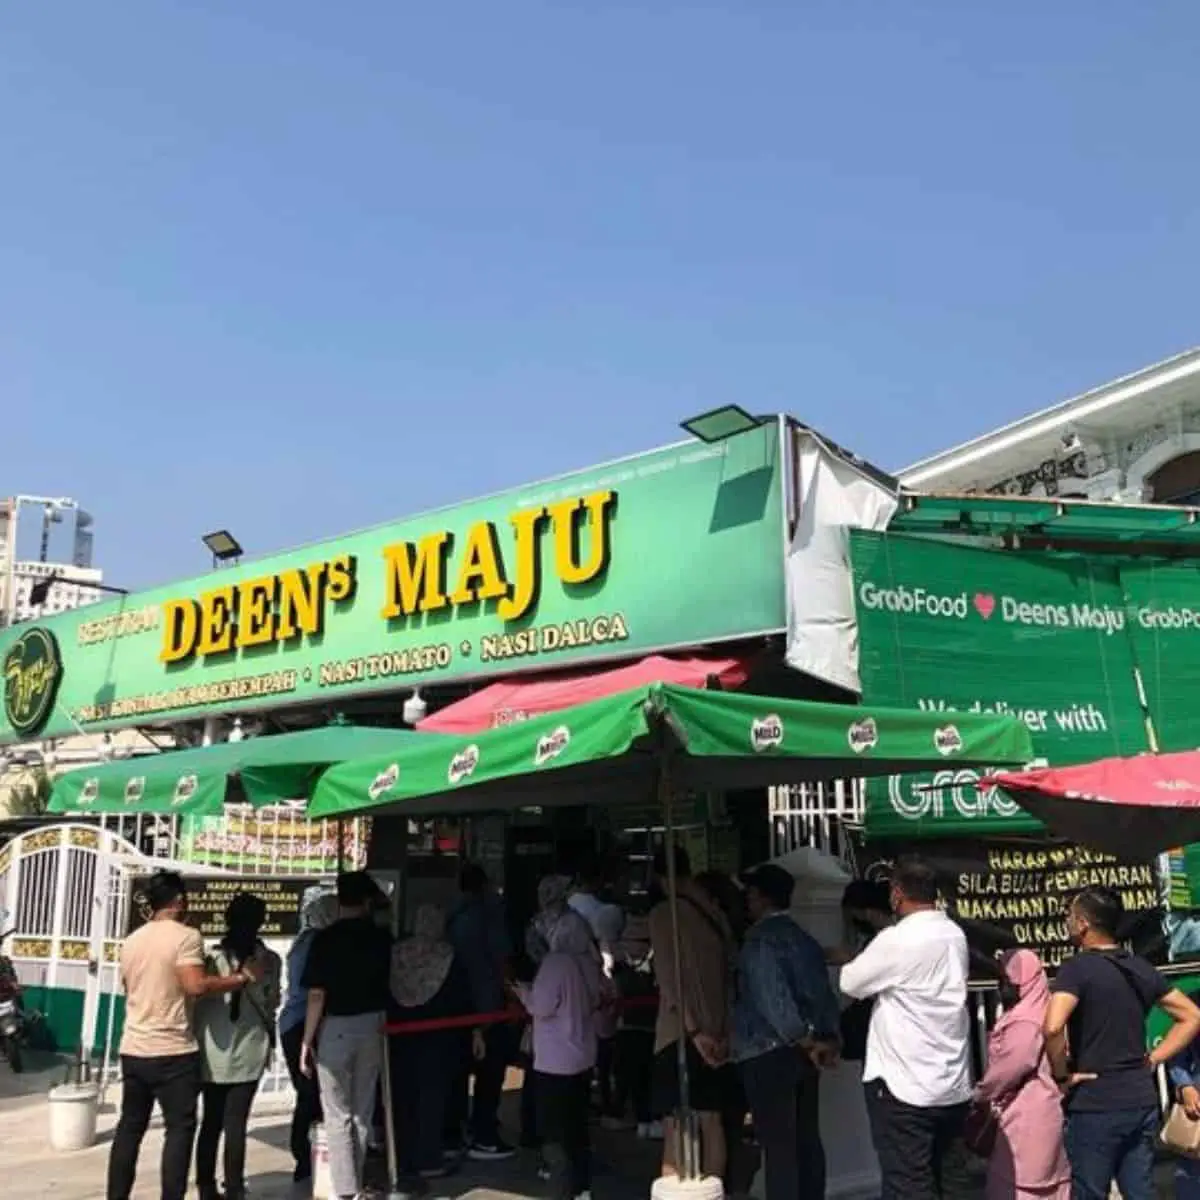 Deen Maju’s location with people lining up to order 